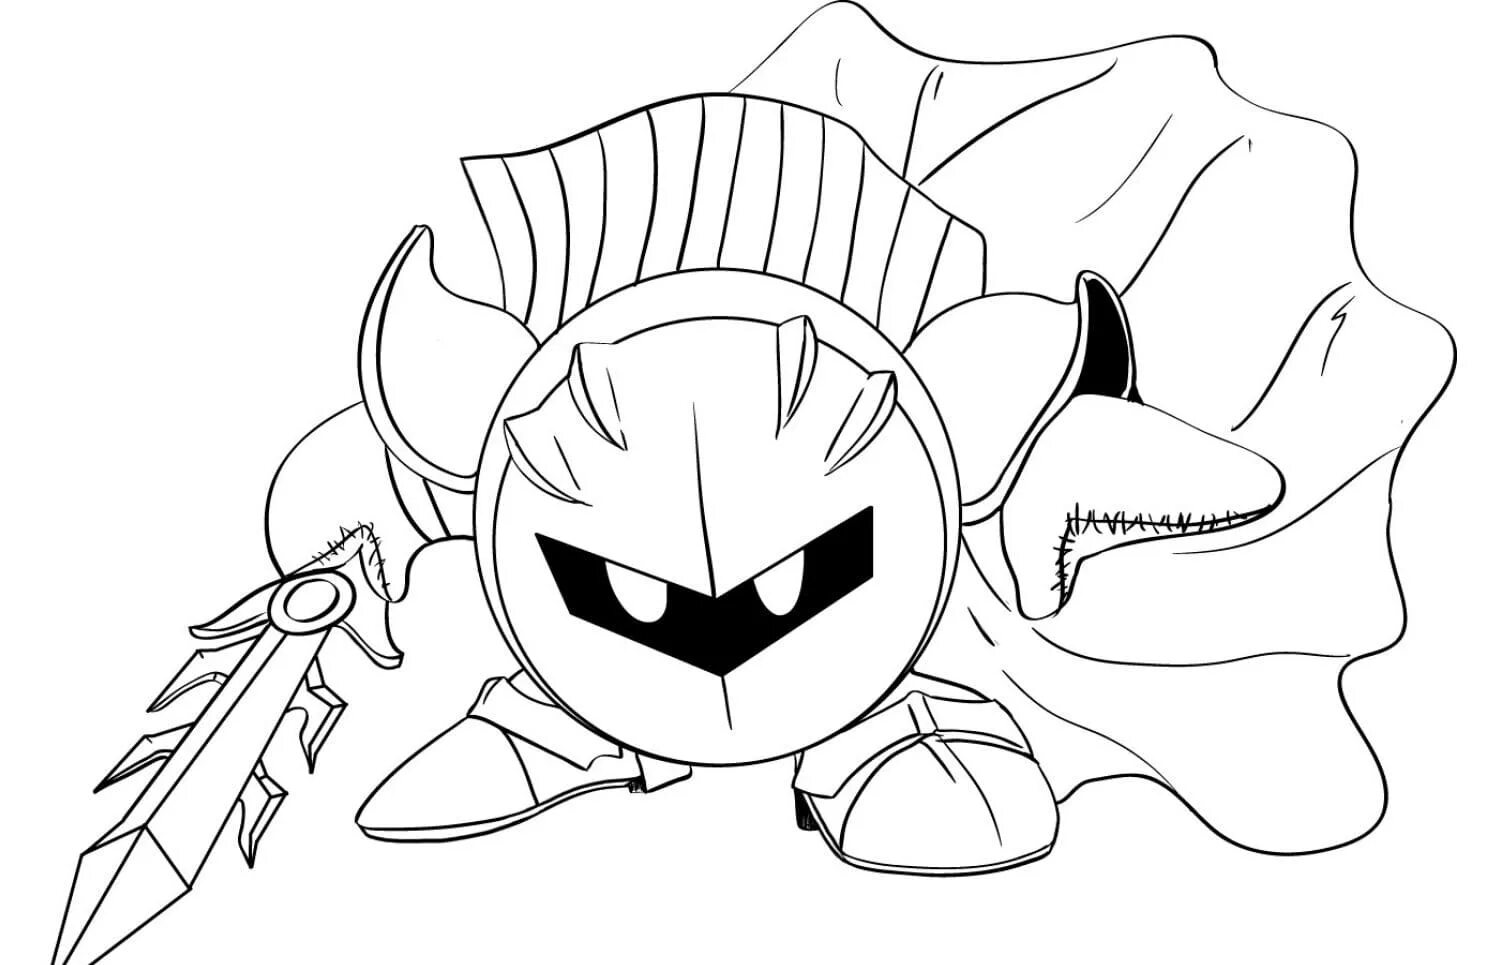 Meta knight coloring page